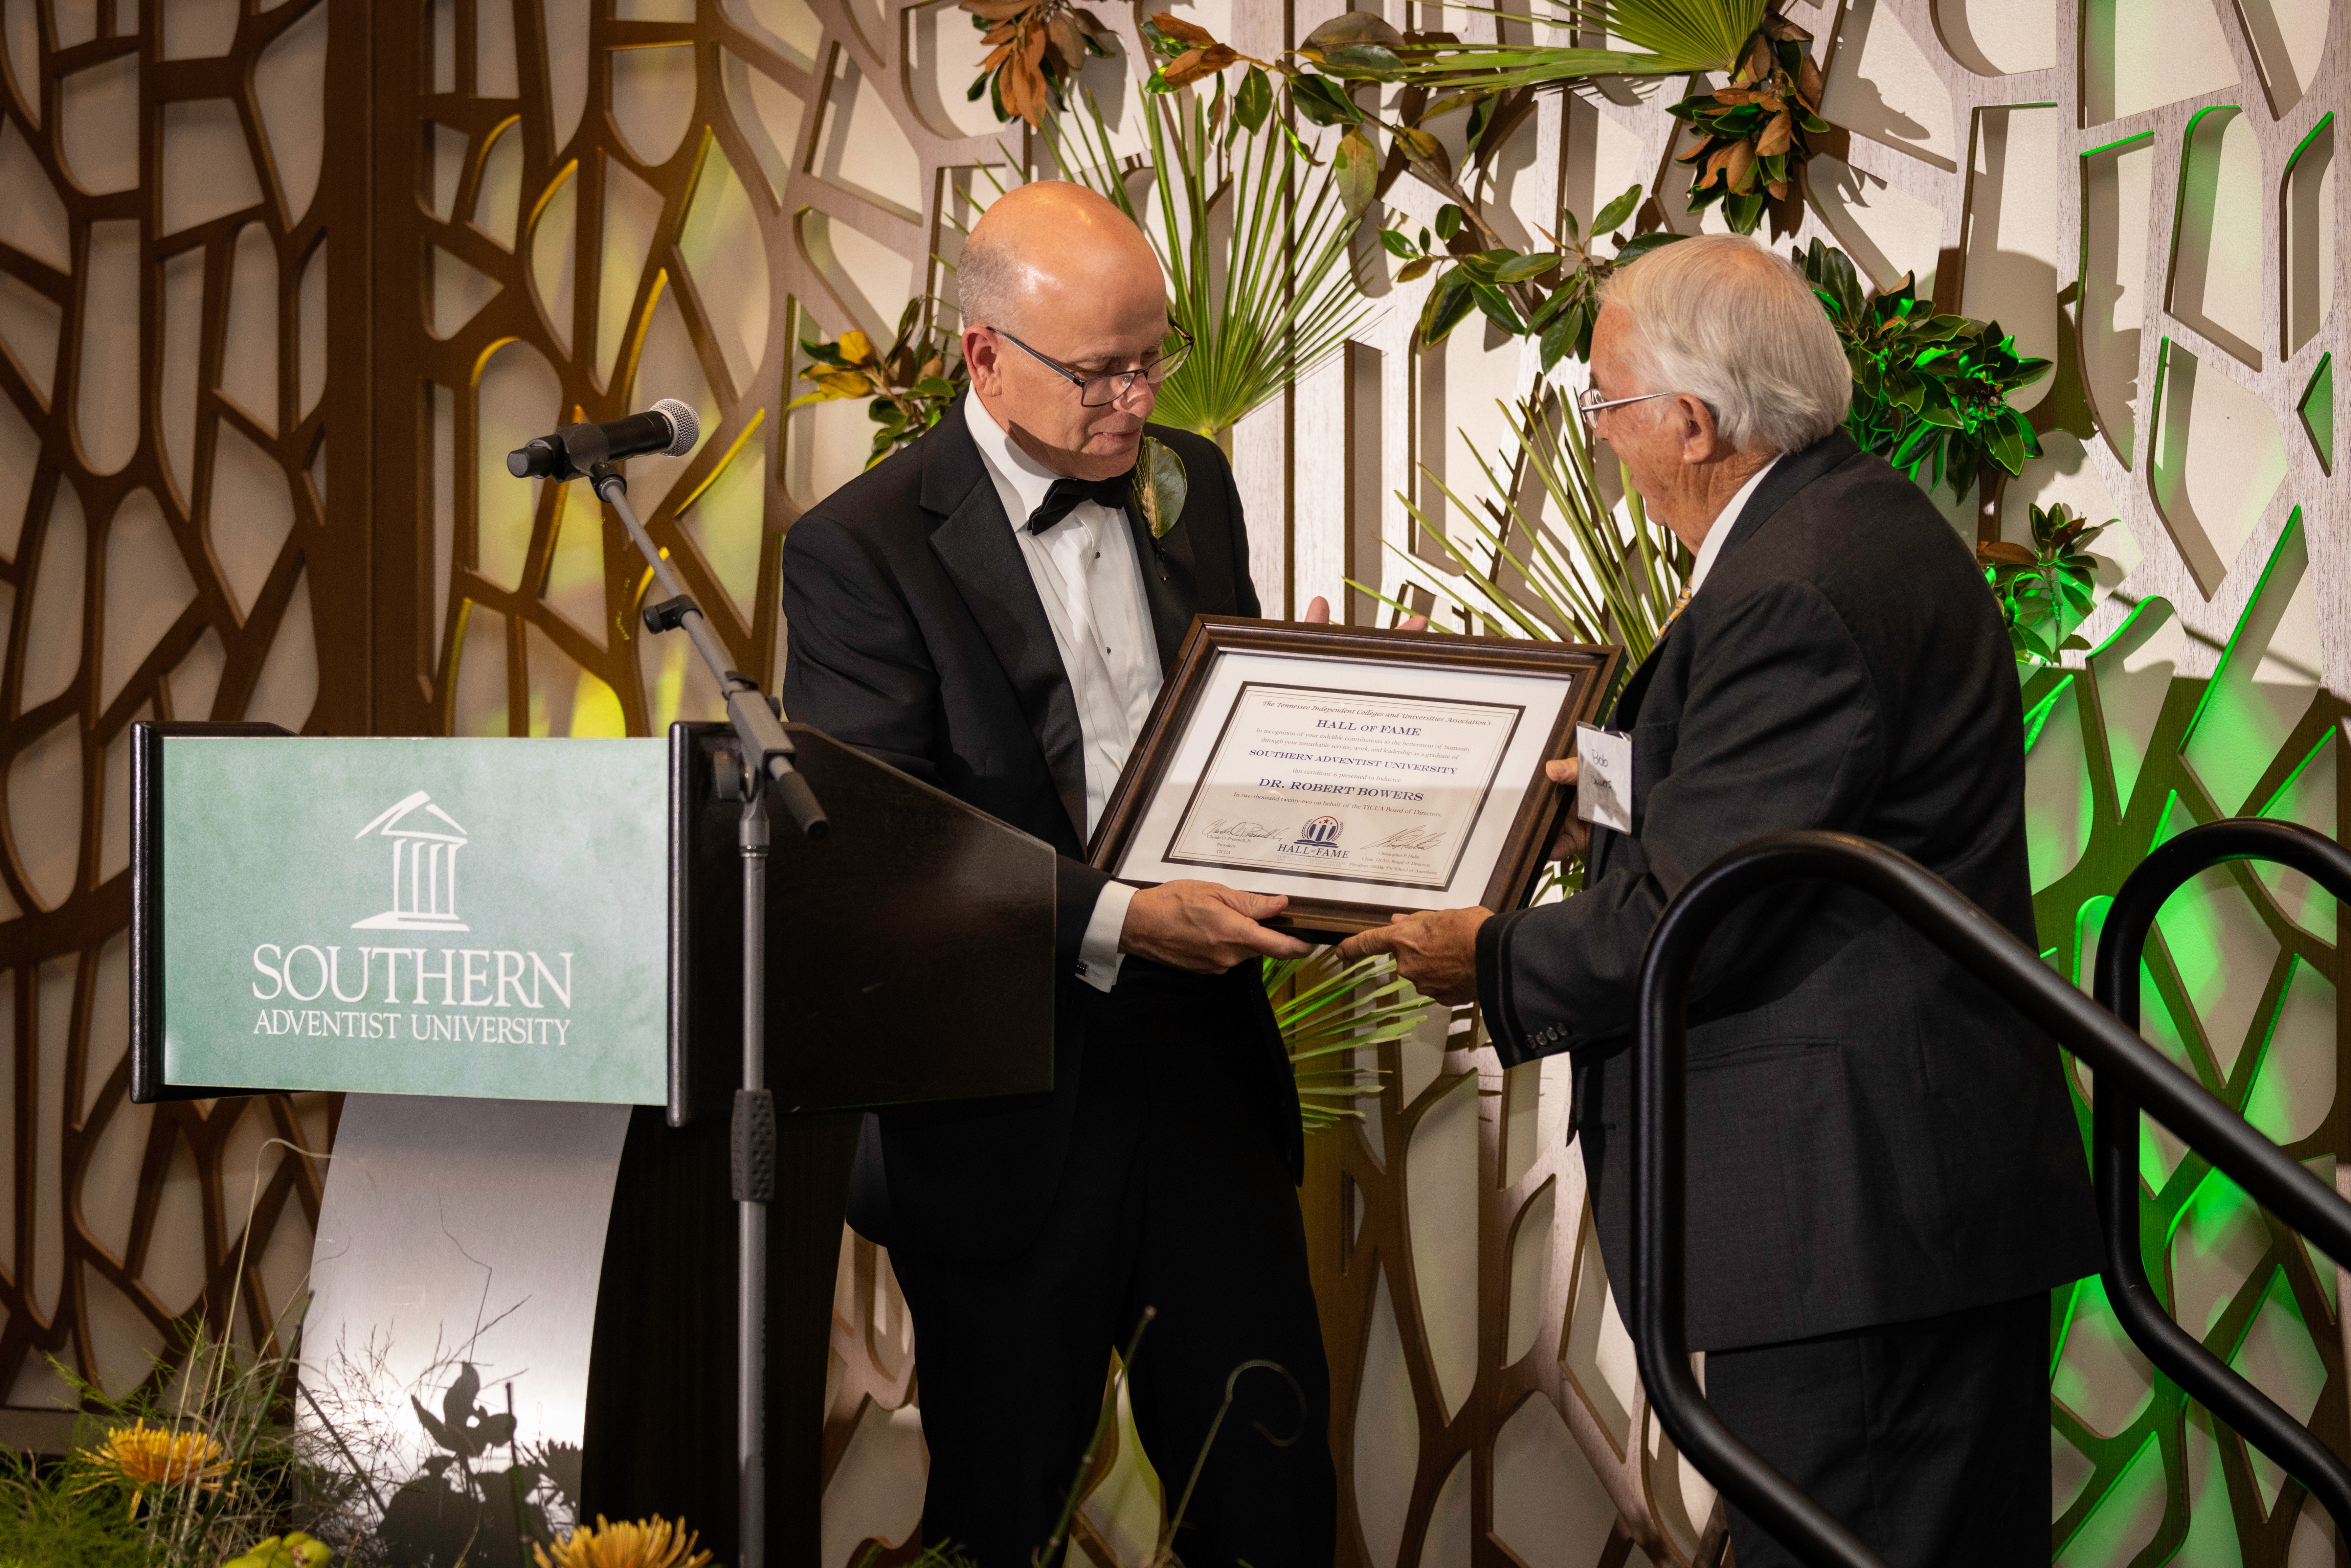 The Tennessee Independent Colleges and Universities Association (TICUA) Inductee Robert Bowers receives his Hall of Fame certificate from Ken Shaw, Southern Adventist University president.